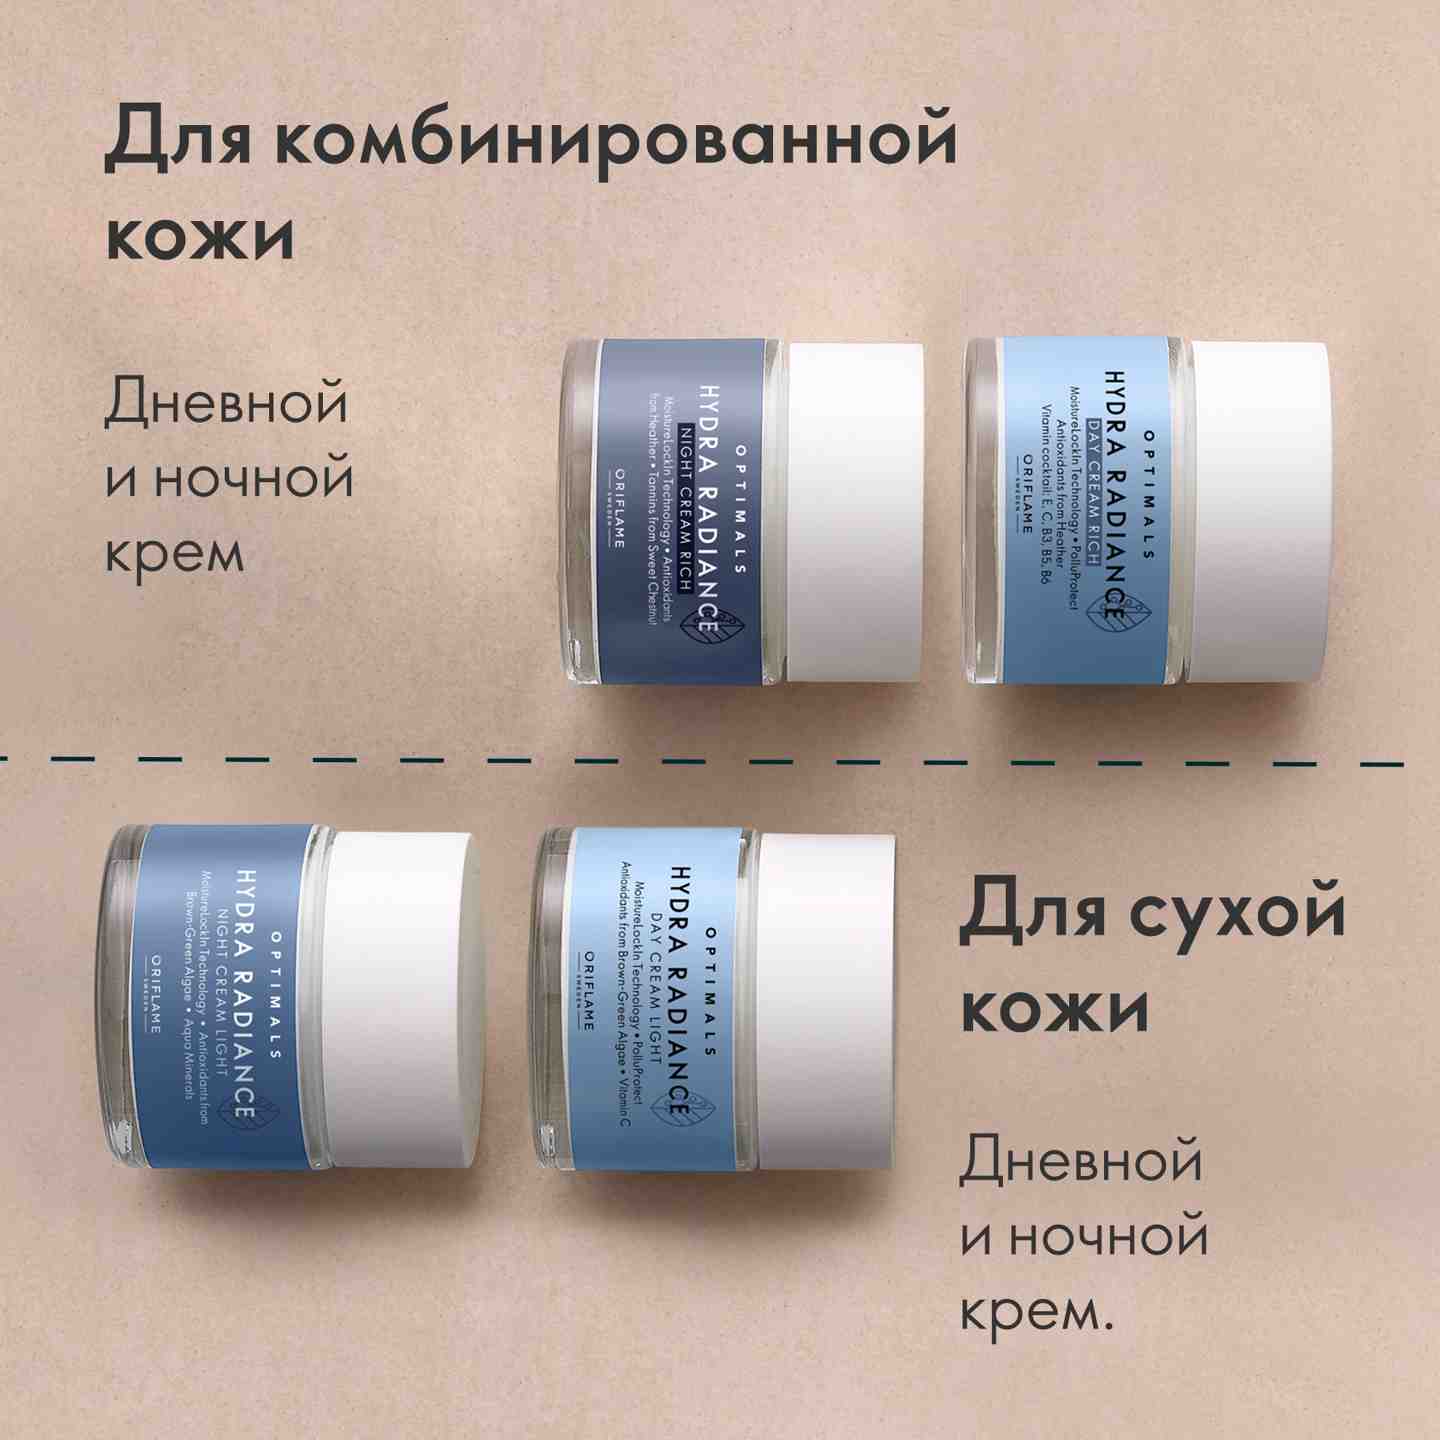 https://media-cdn.oriflame.com/productImage?externalMediaId=product-management-media%2fProducts%2f42587%2fGE%2f42587_4.png&id=15124655&version=1